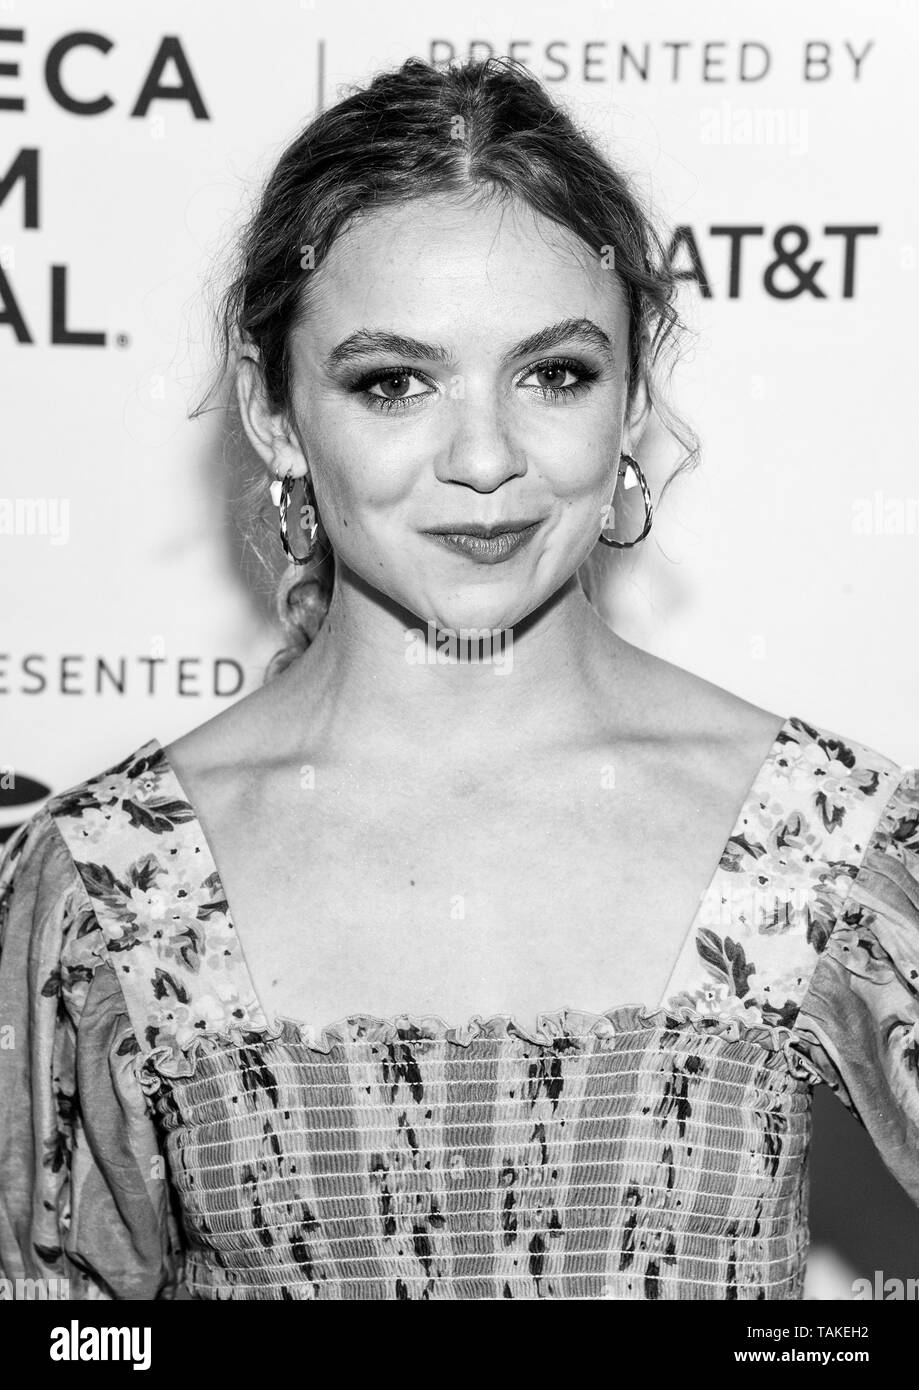 New York, NY - April 26, 2019: Morgan Saylor attends the 'Blow The Man Down' screening during the 2019 Tribeca Film Festival at SVA Theater Stock Photo